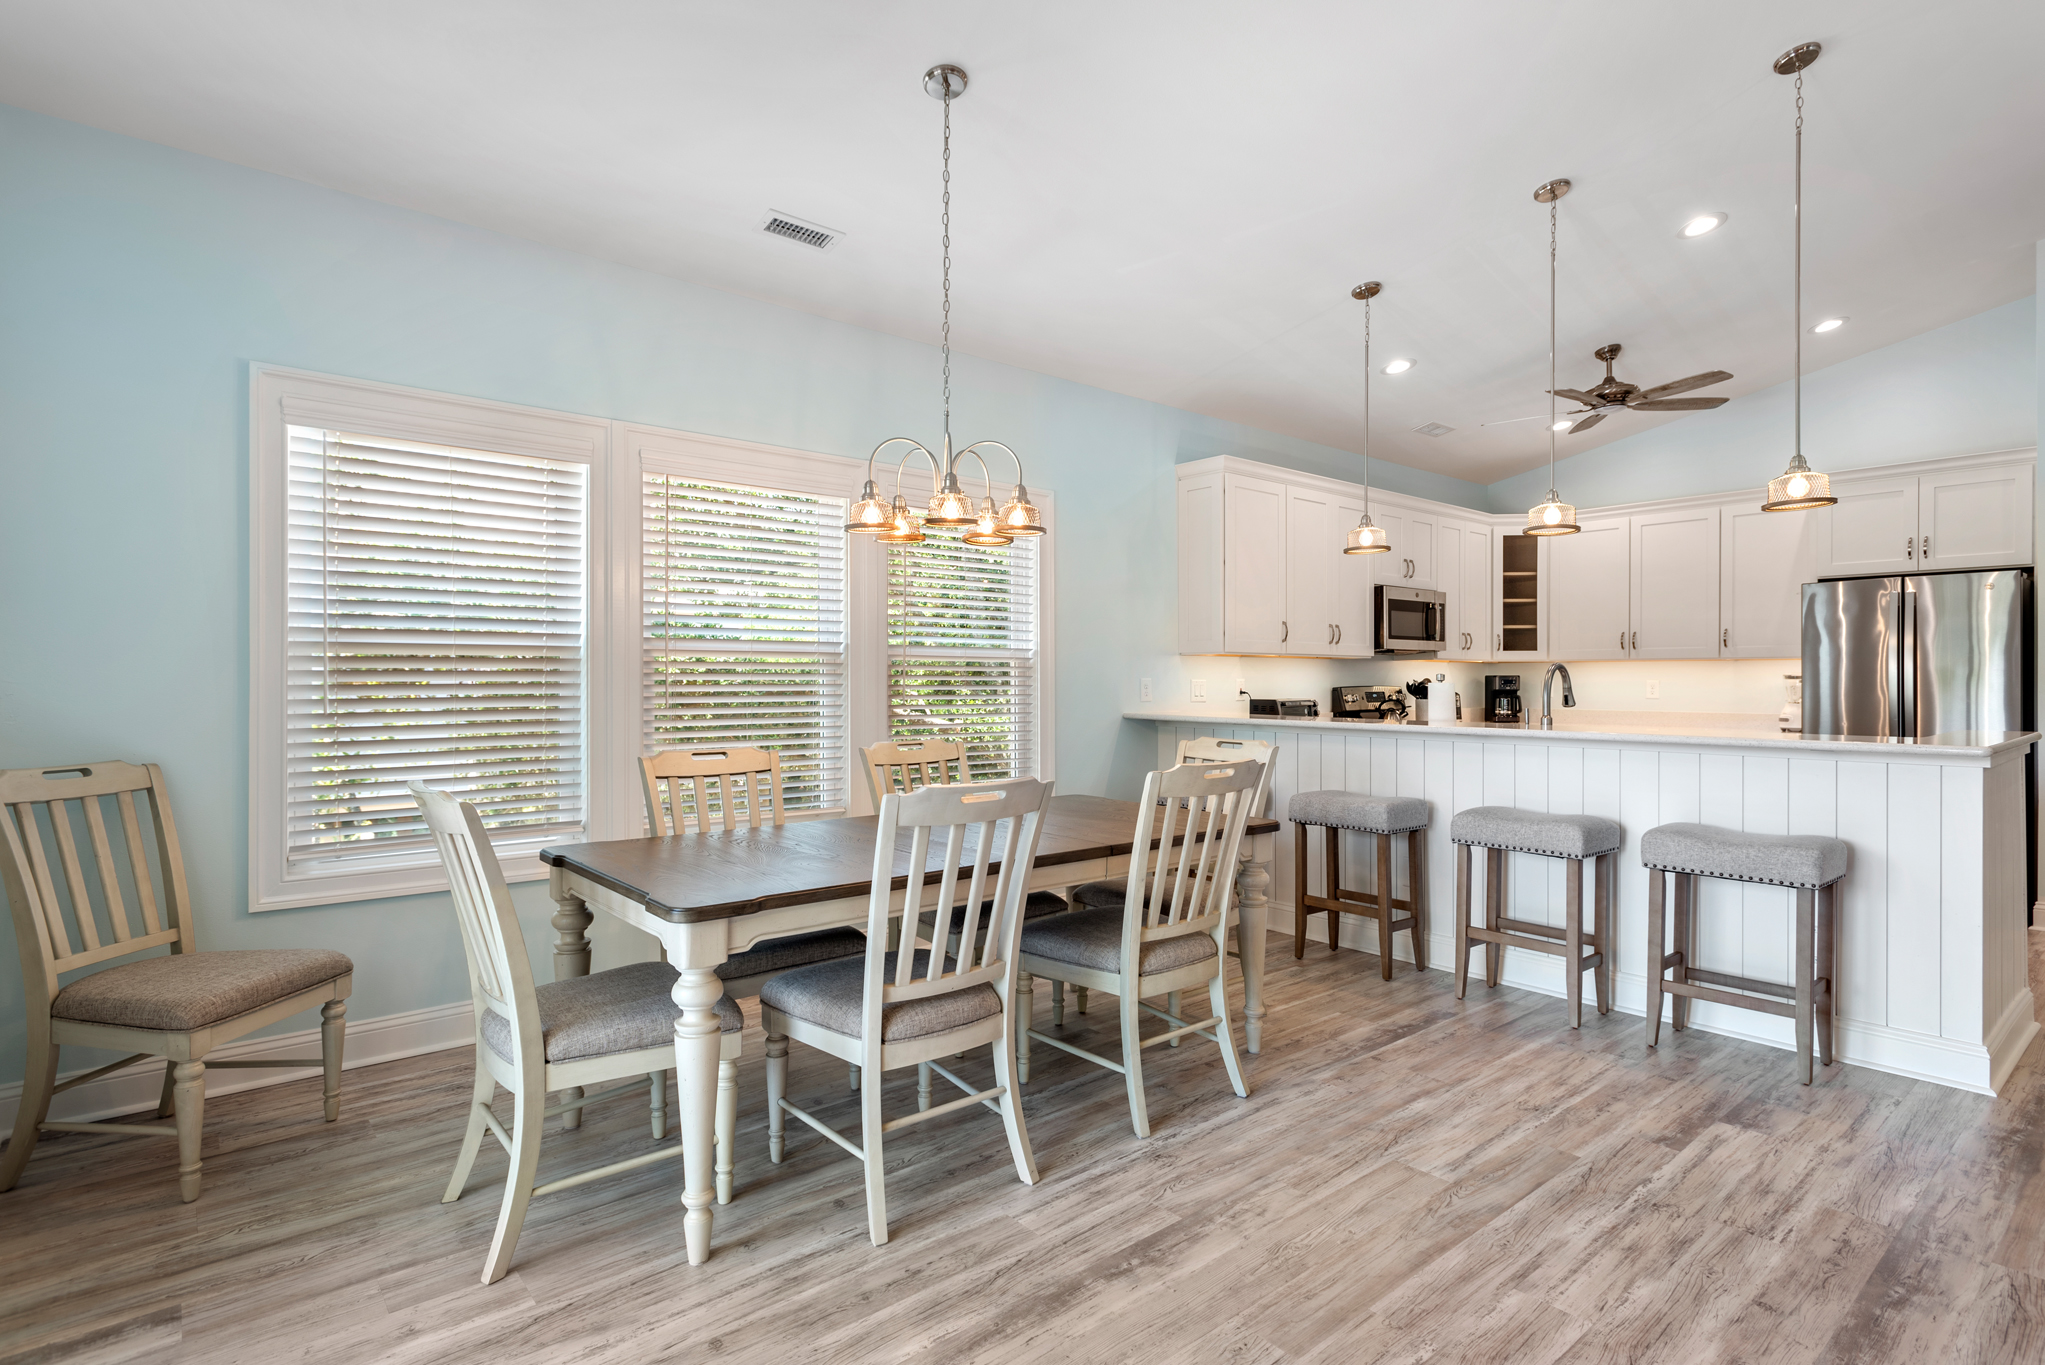 JR9706: Tranquility Cove | Top Level Dining Area